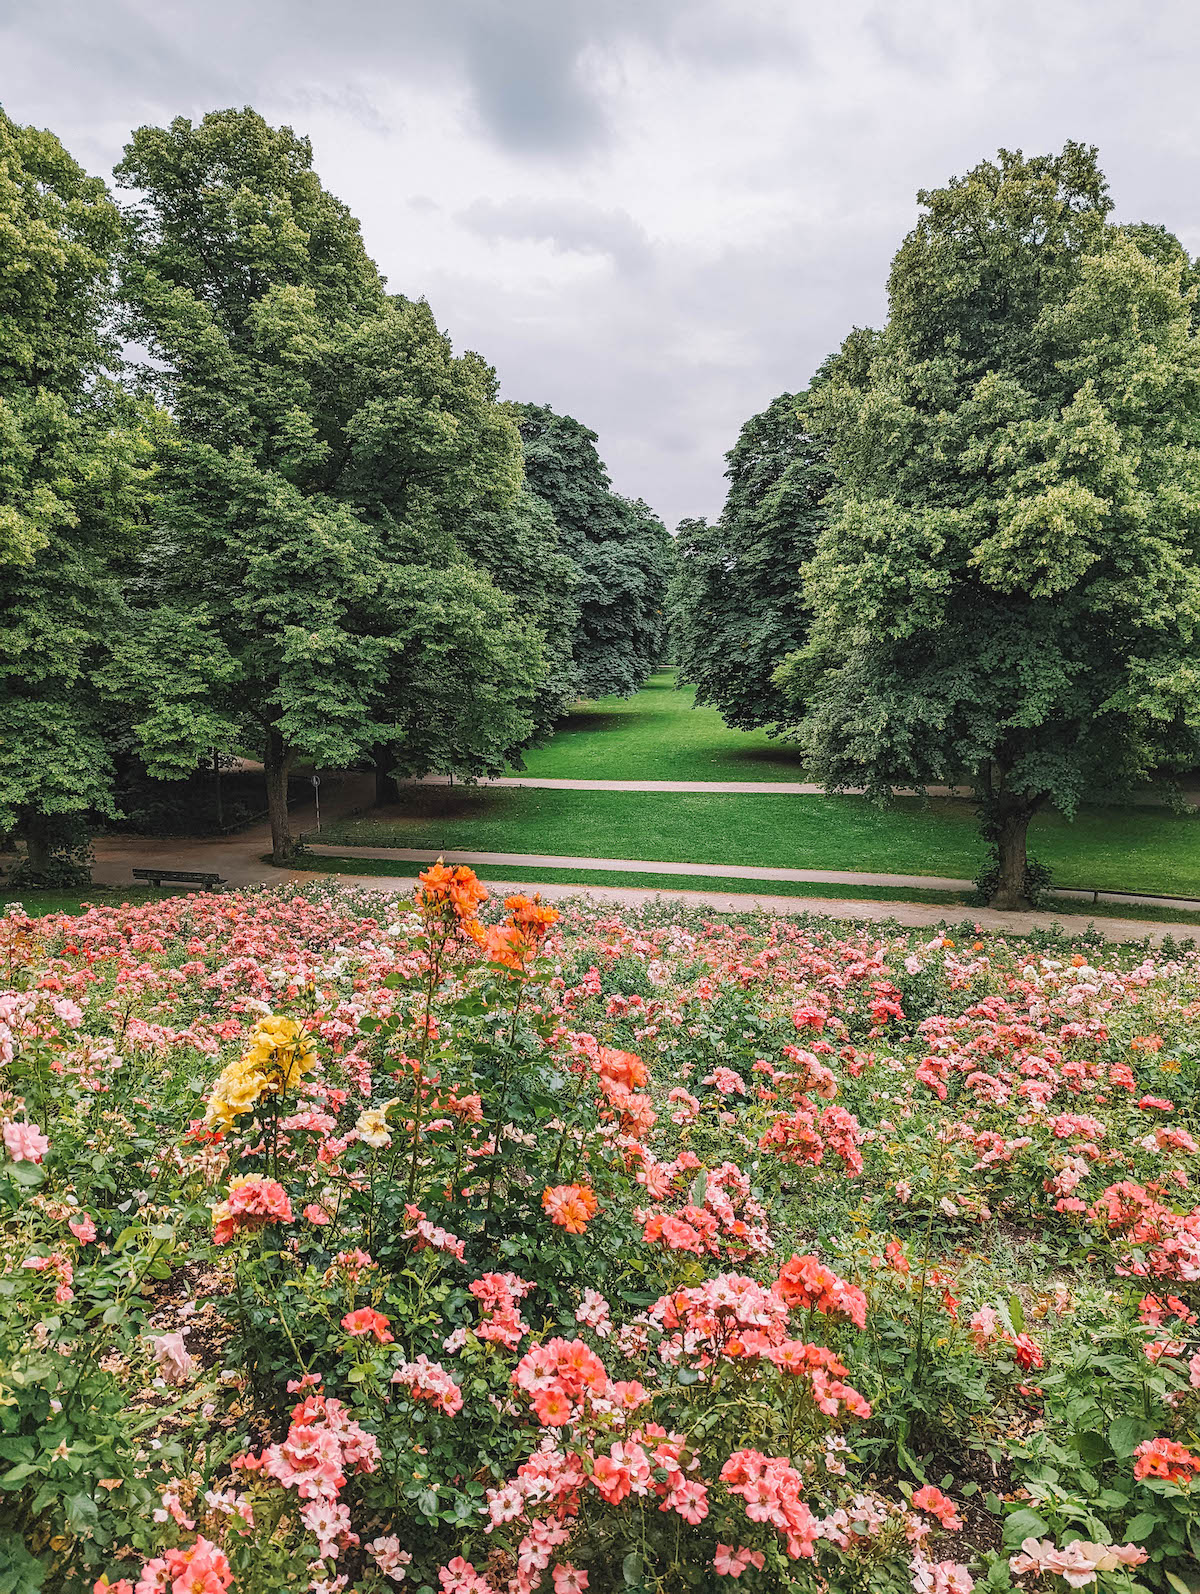 The roses blooming at Luitpold Park in Munich